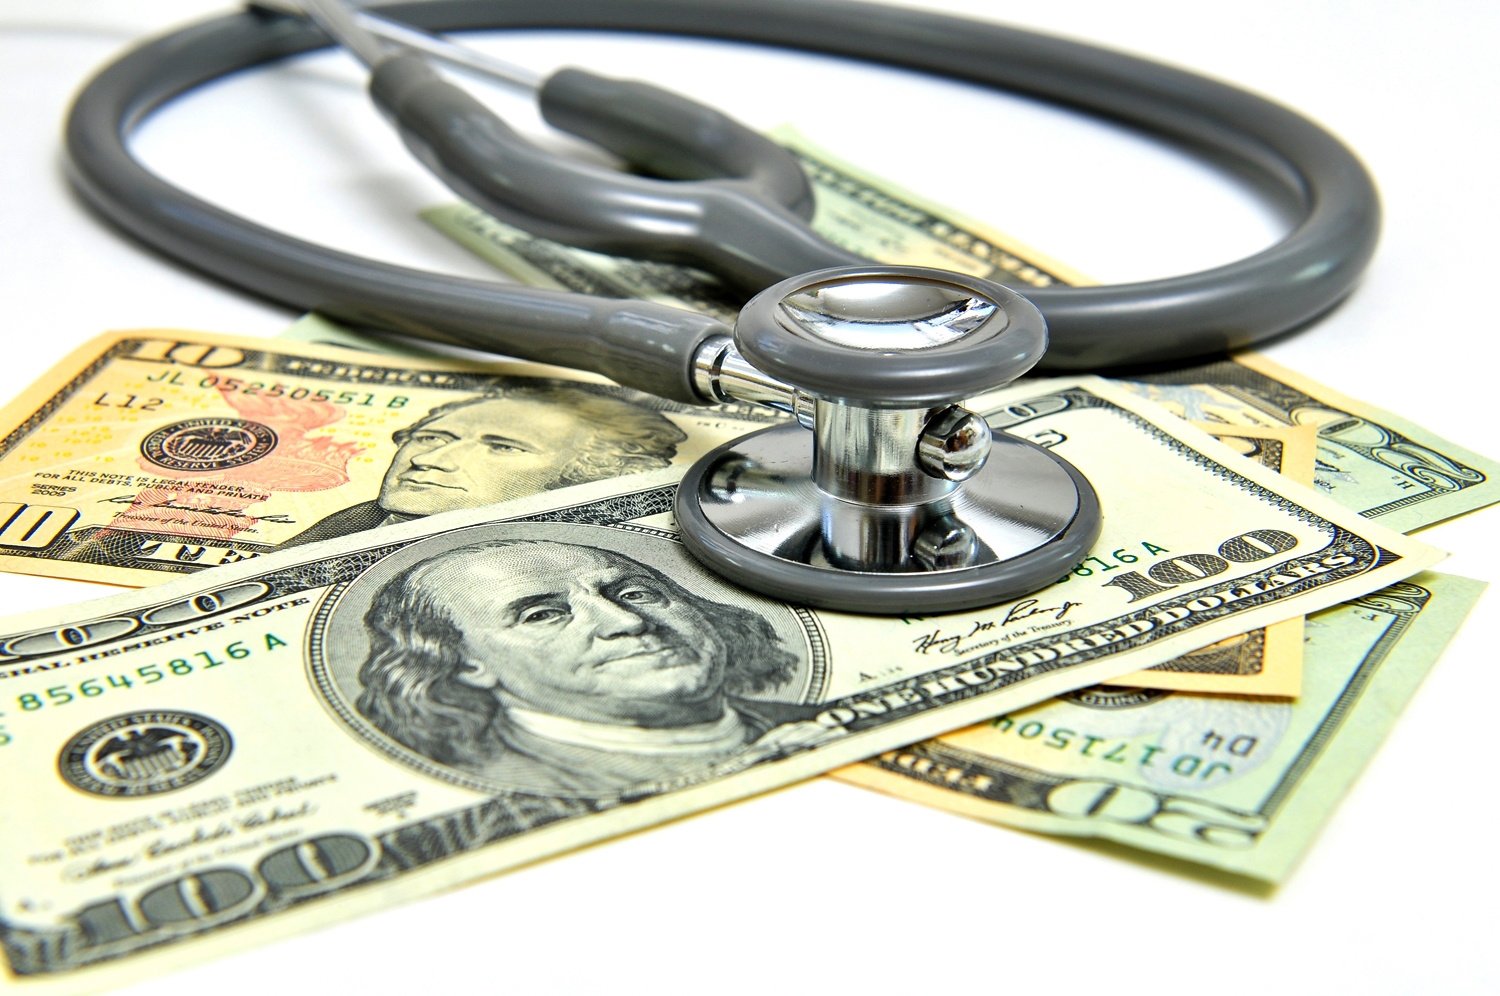 How Much Does Health Care Cost